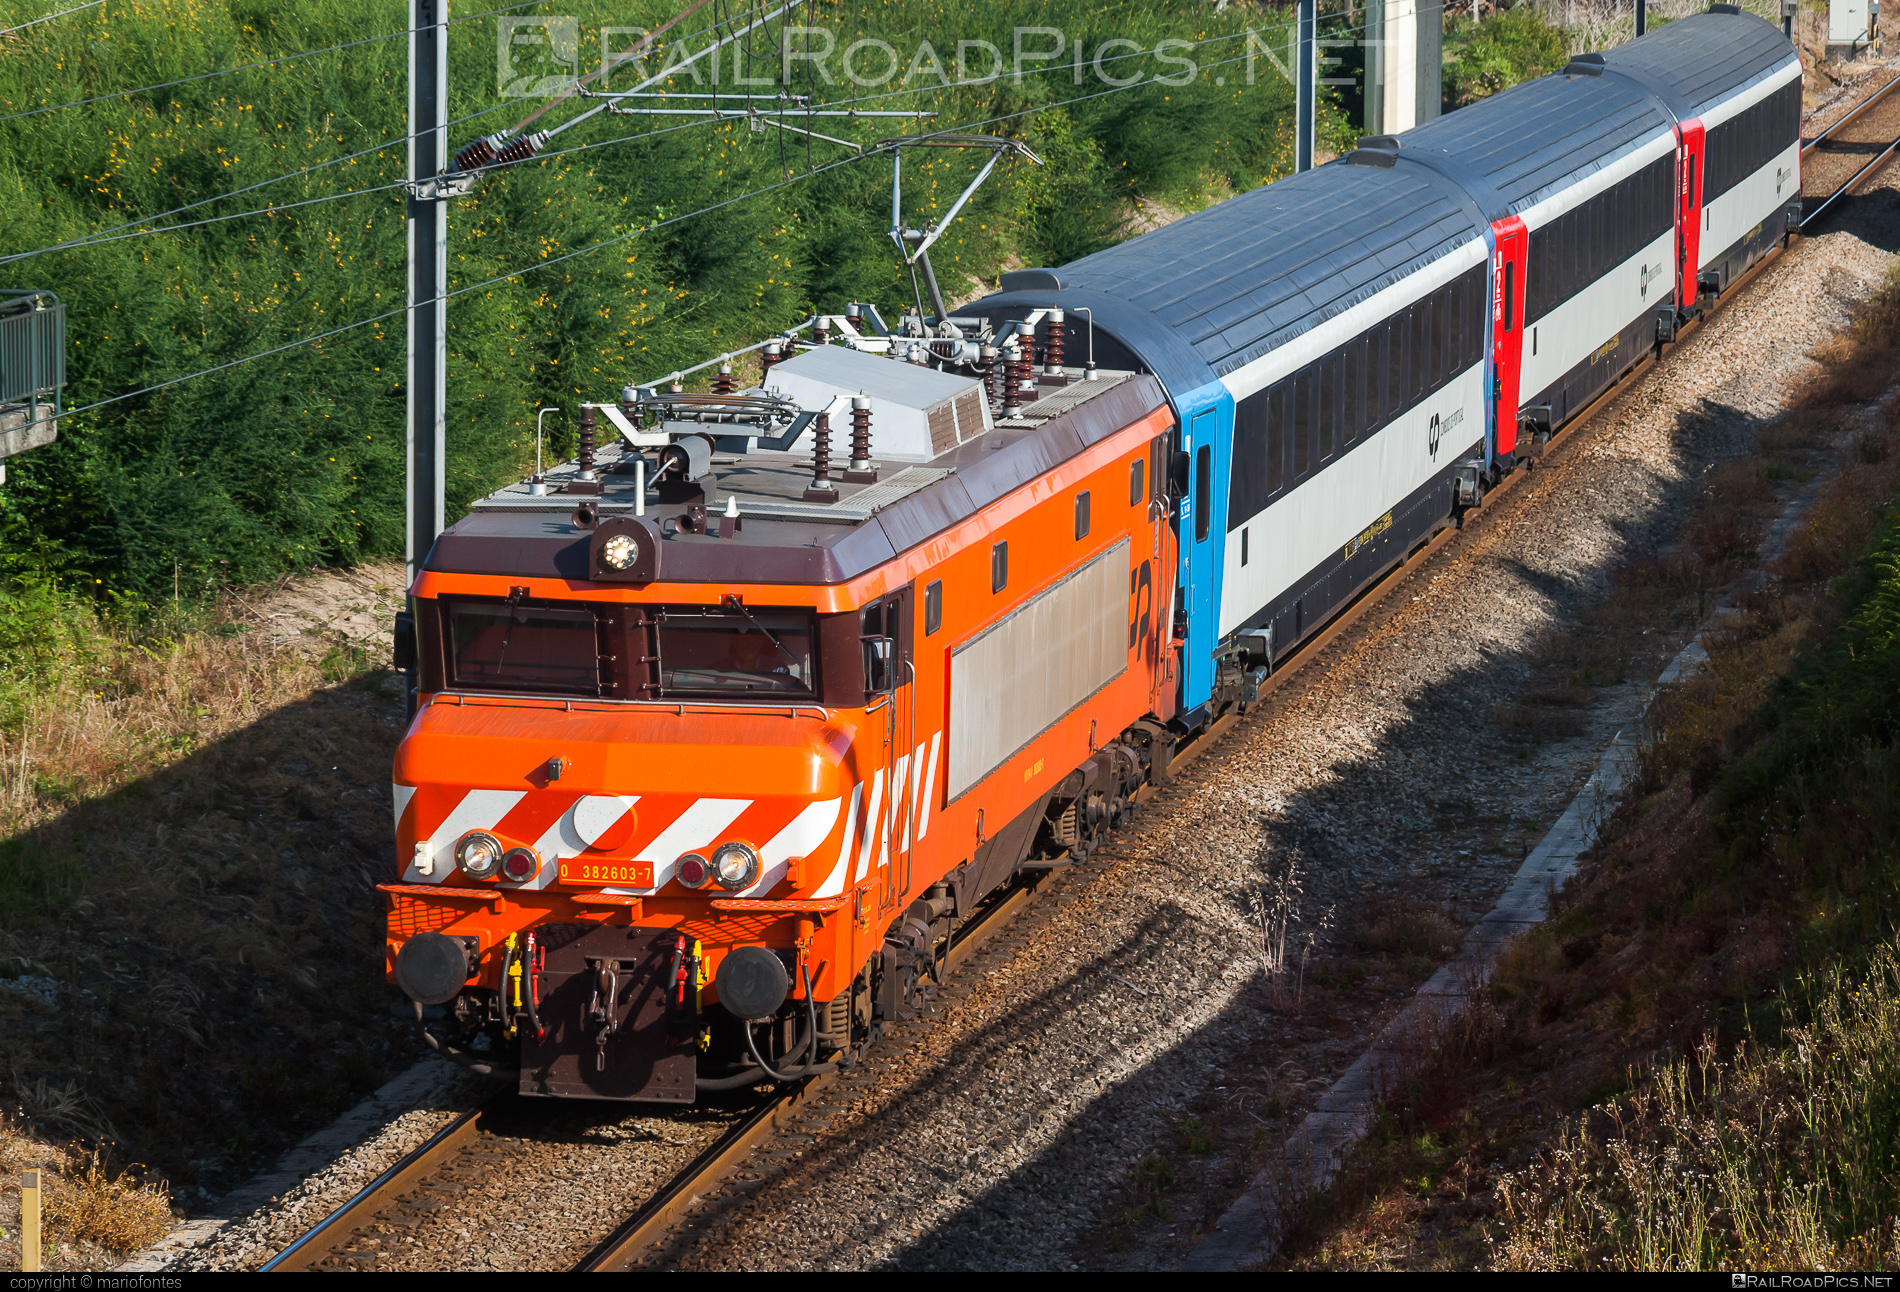 CP Class 2600 - 2603 operated by CP - Comboios de Portugal, E.P.E. #comboiosDePortugal #comboiosDePortugalEPE #cpClass2600 #nezCassee #sncfBB15000